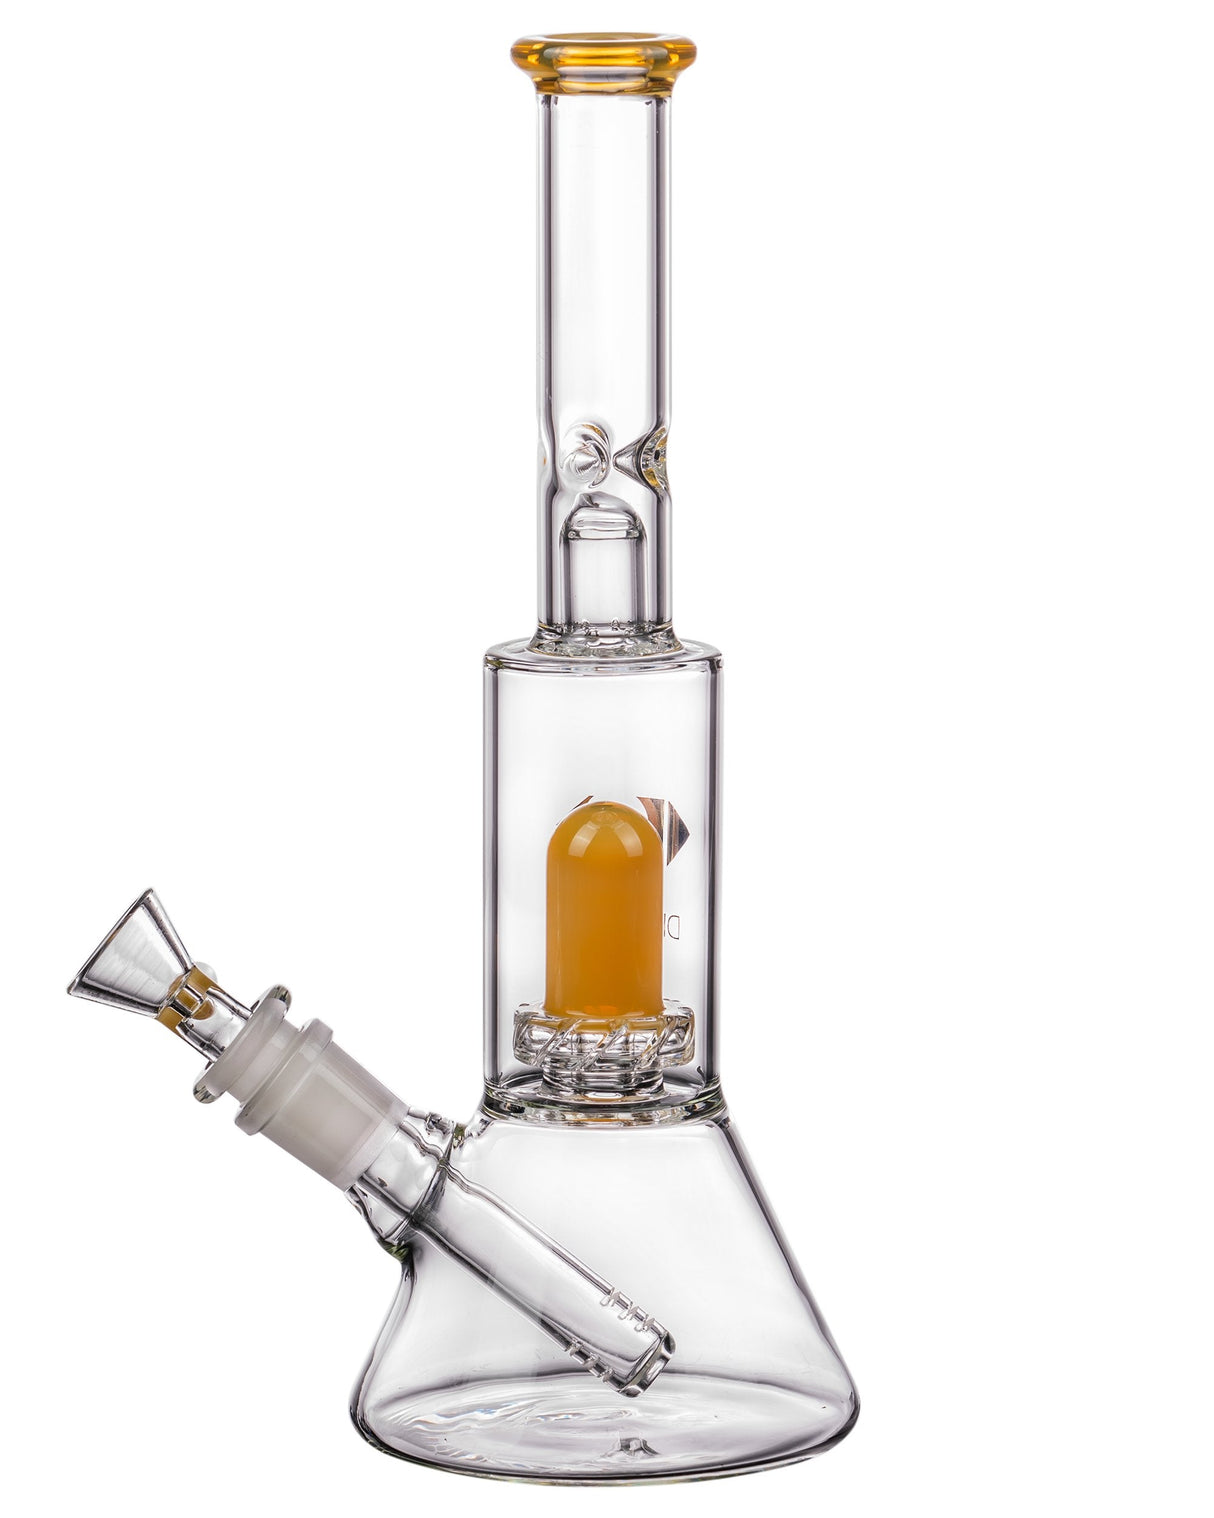 Diamond Glass Skinny Neck Beaker with UFO Chamber and Showerhead Percolator, 10" Tall, Clear with Yellow Accents